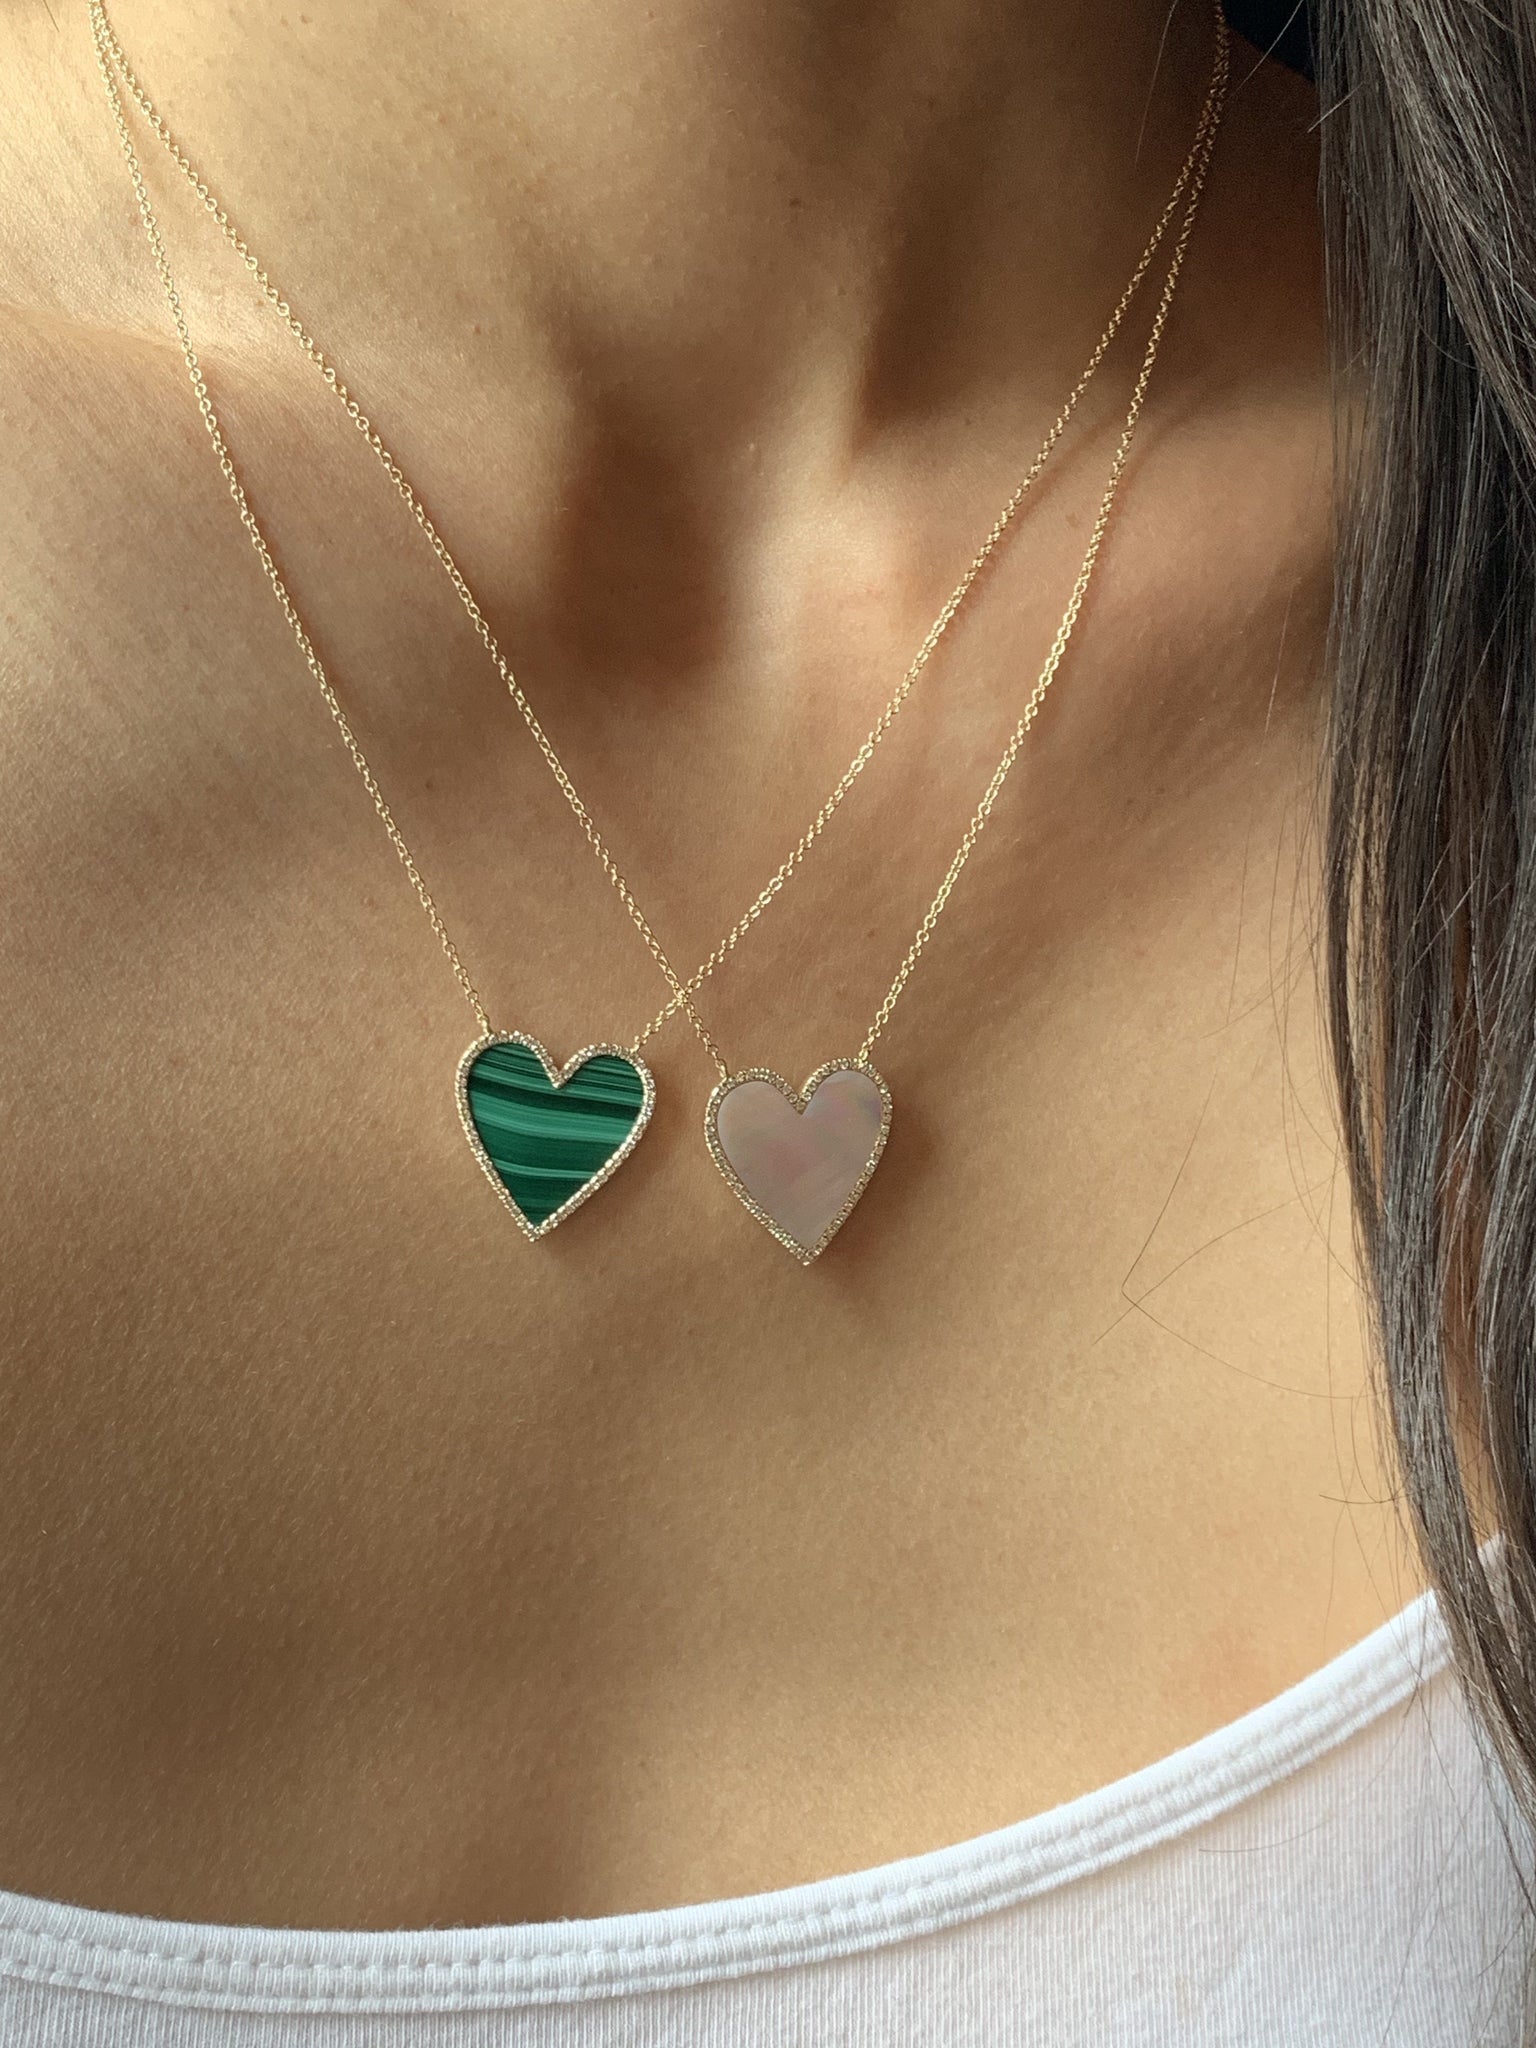 MOTHER OF PEARL AND DIAMOND HEART NECKLACE